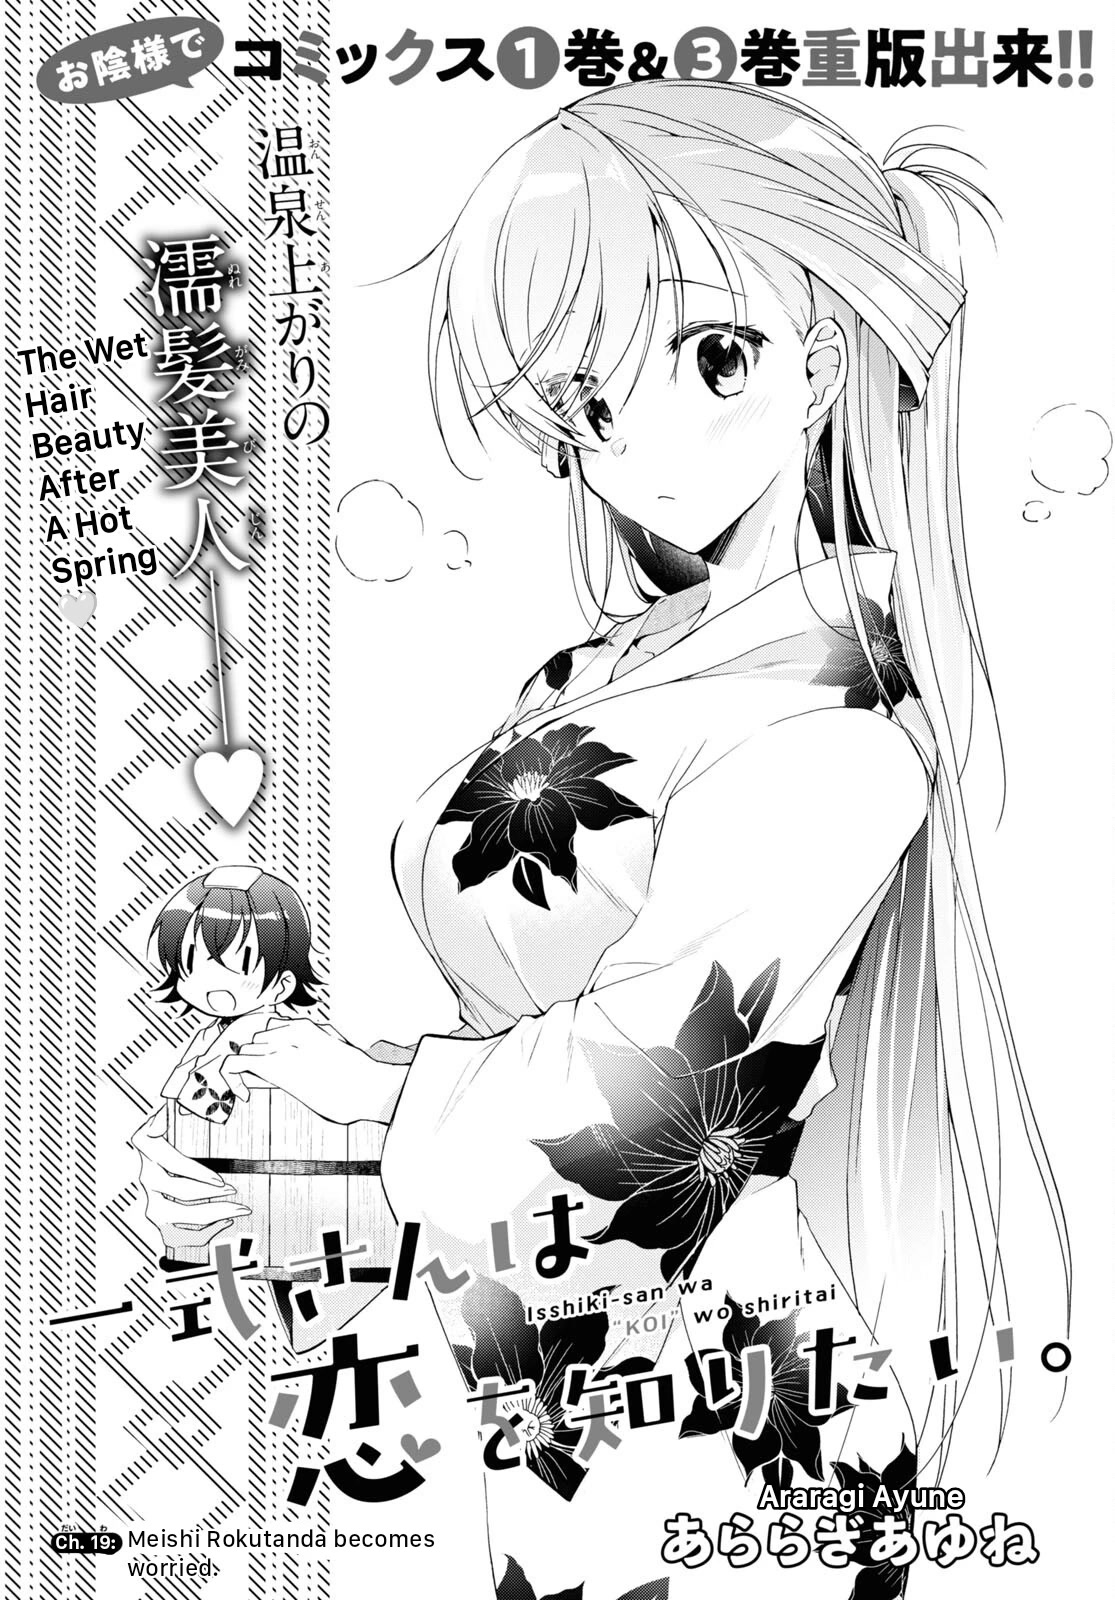 Isshiki-san Wants to Know About Love. - chapter 19 - #1